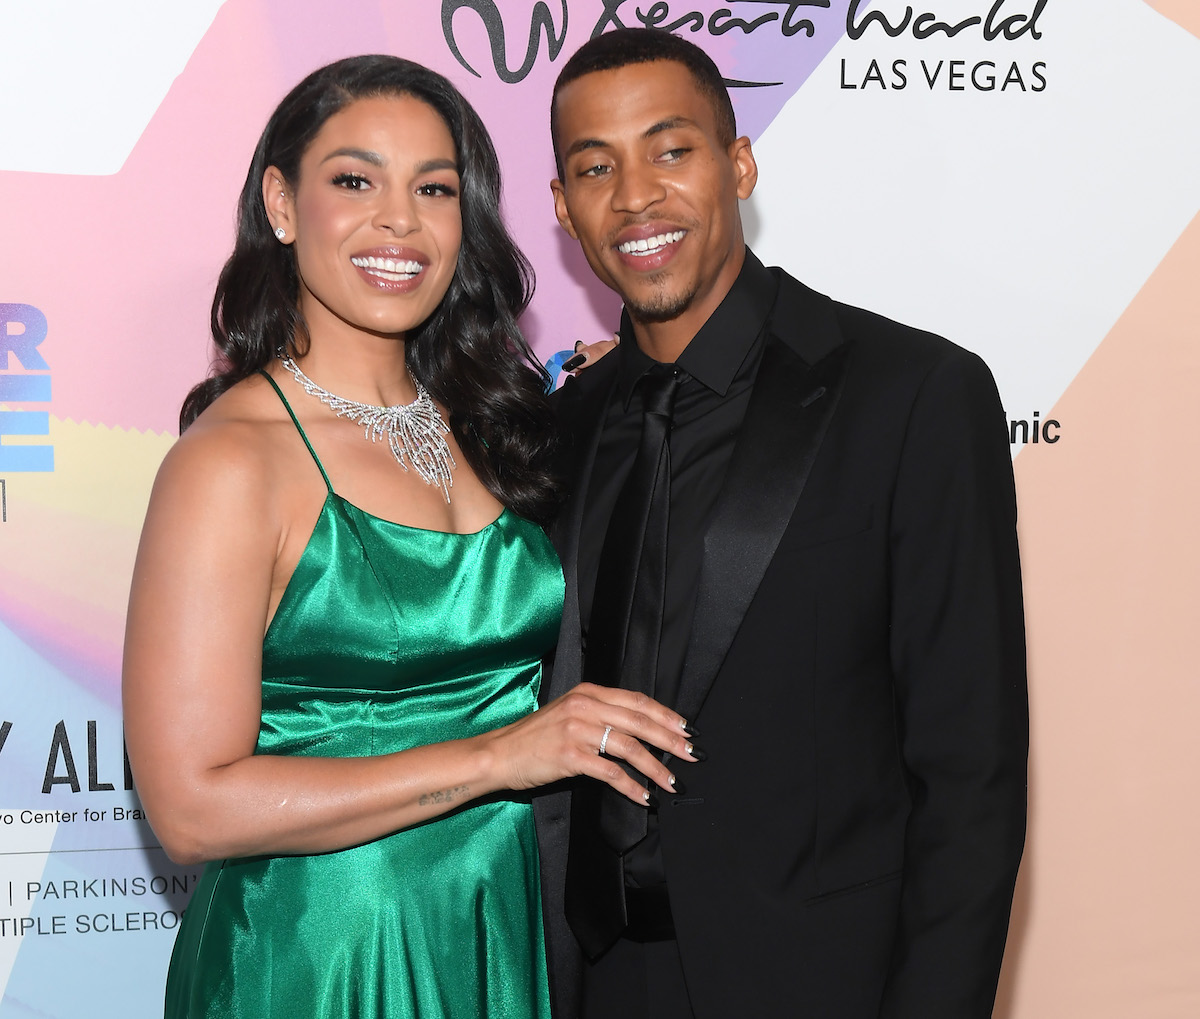 Jordin Sparks and Dana Isaiah pose on the red carpet